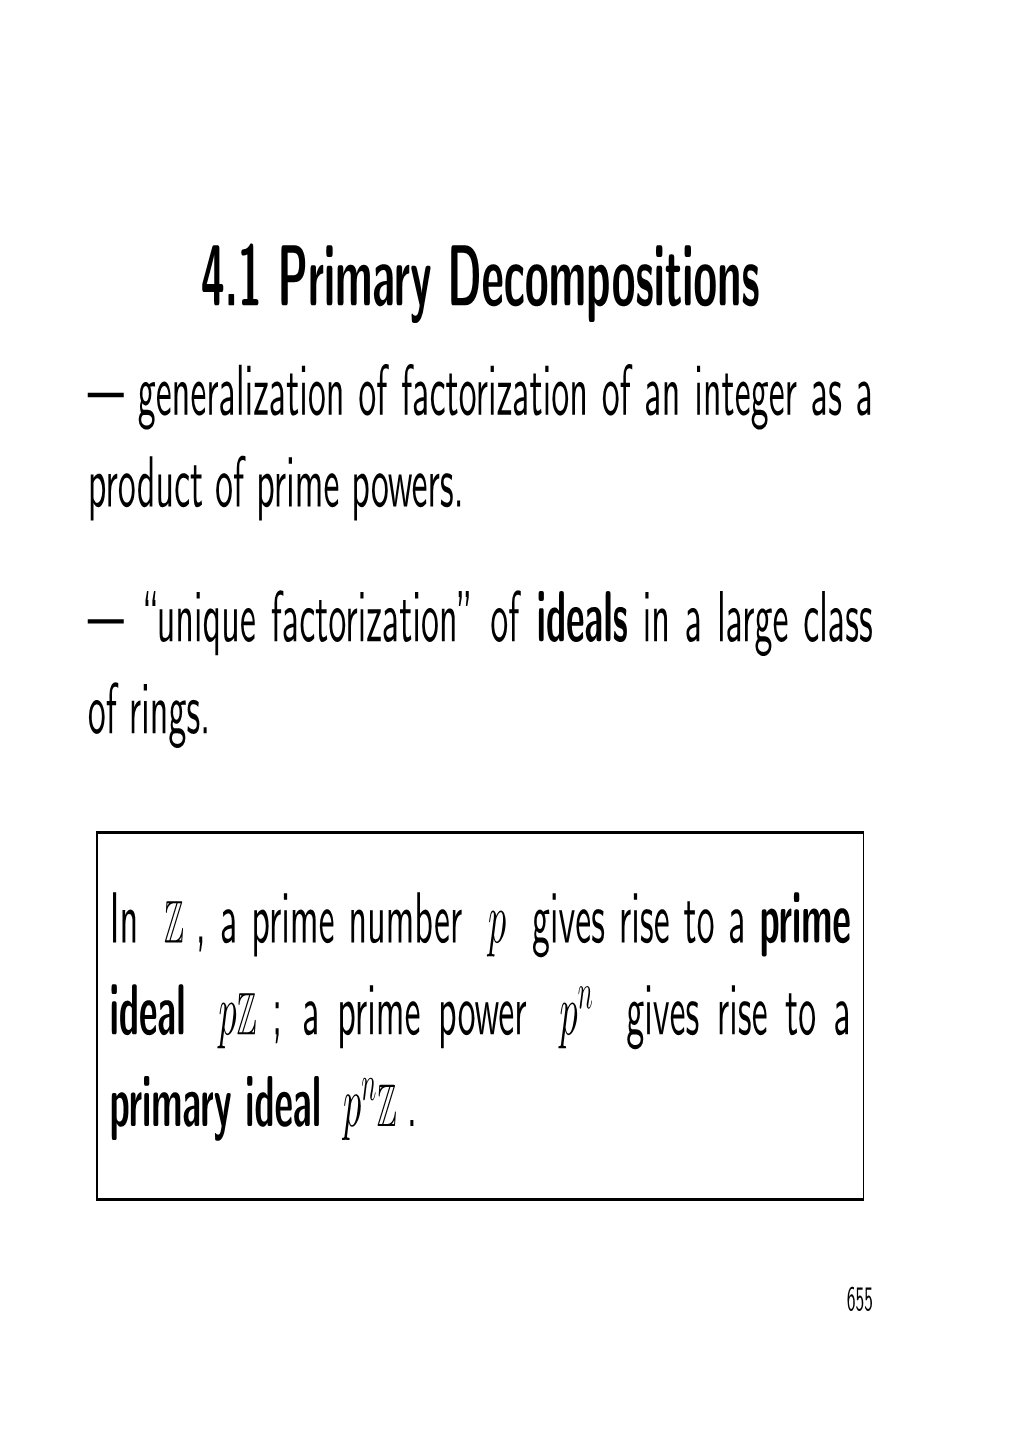 4.1 Primary Decompositions — Generalization of Factorization of an Integer As a Product of Prime Powers